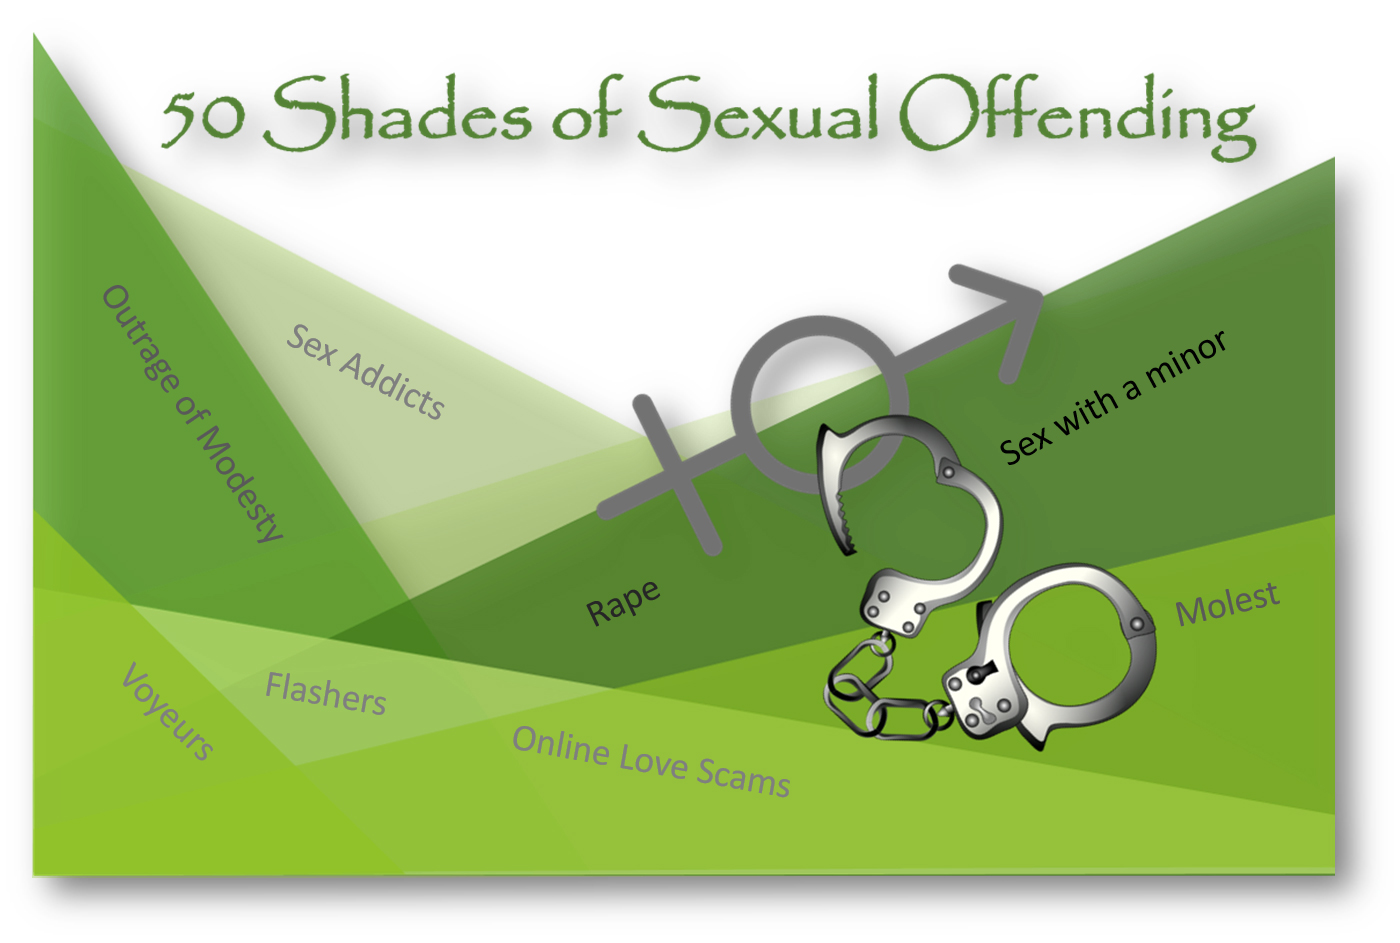 Fifty Shades of Sexual Offending